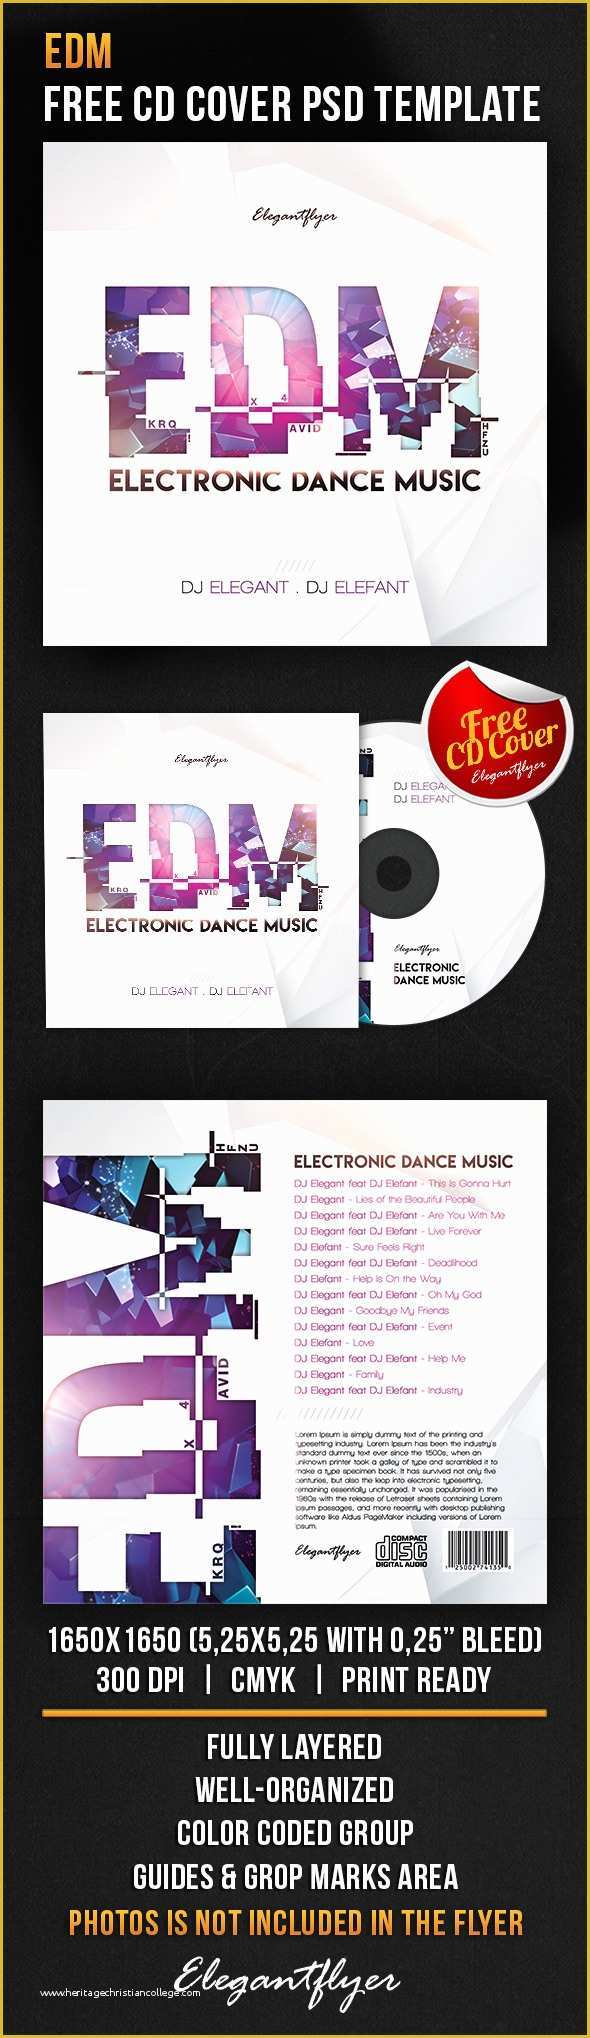 Free Cd Jewel Case Template Of Edm – Free Cd Cover Psd Template – by Elegantflyer